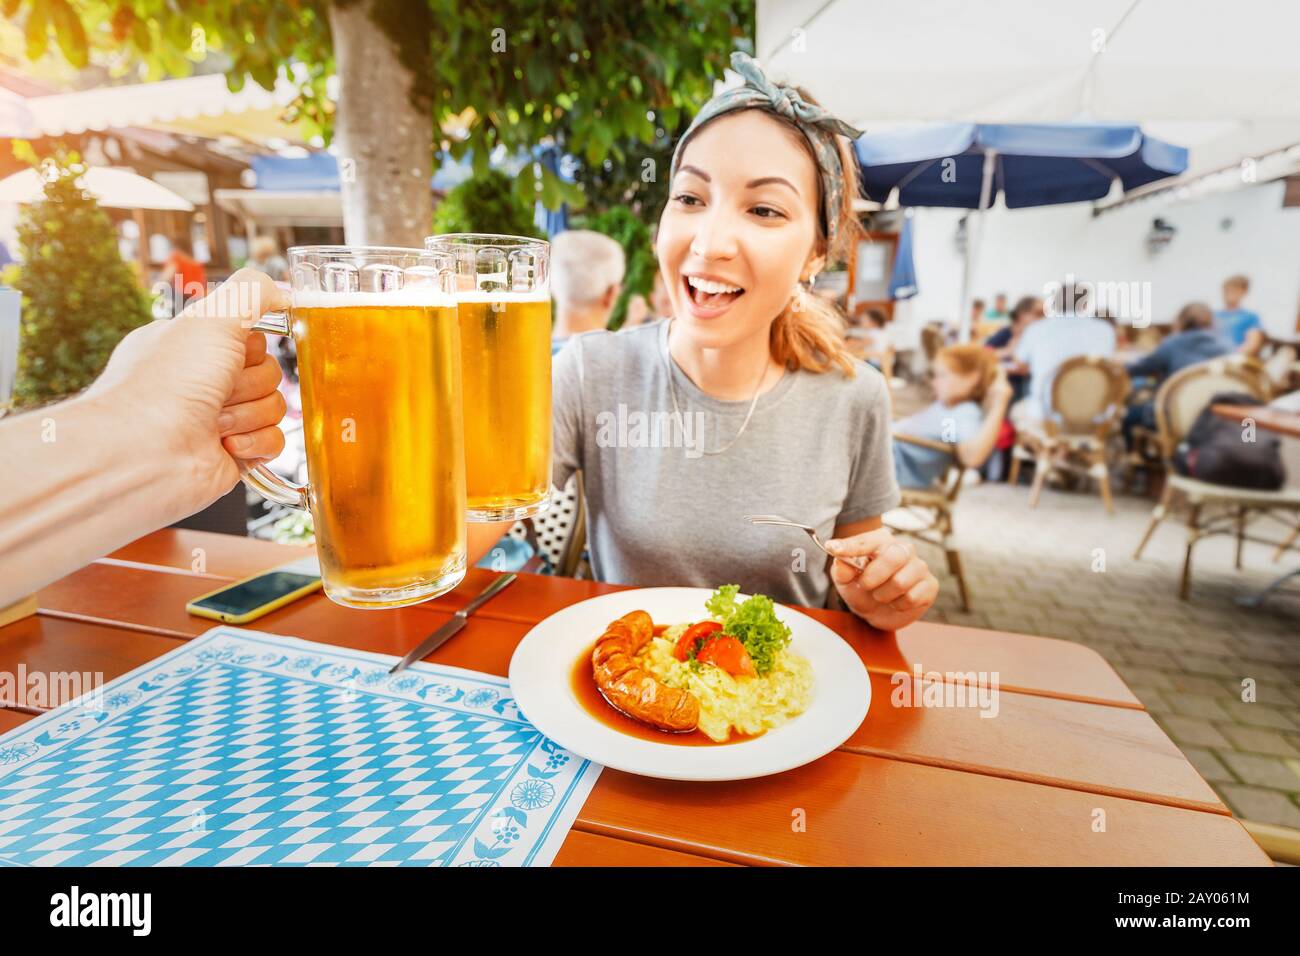 Happy Asian girl clinks a mug of Bavarian beer in Biergarten. Traditional German snack with sausage and potato salad Stock Photo